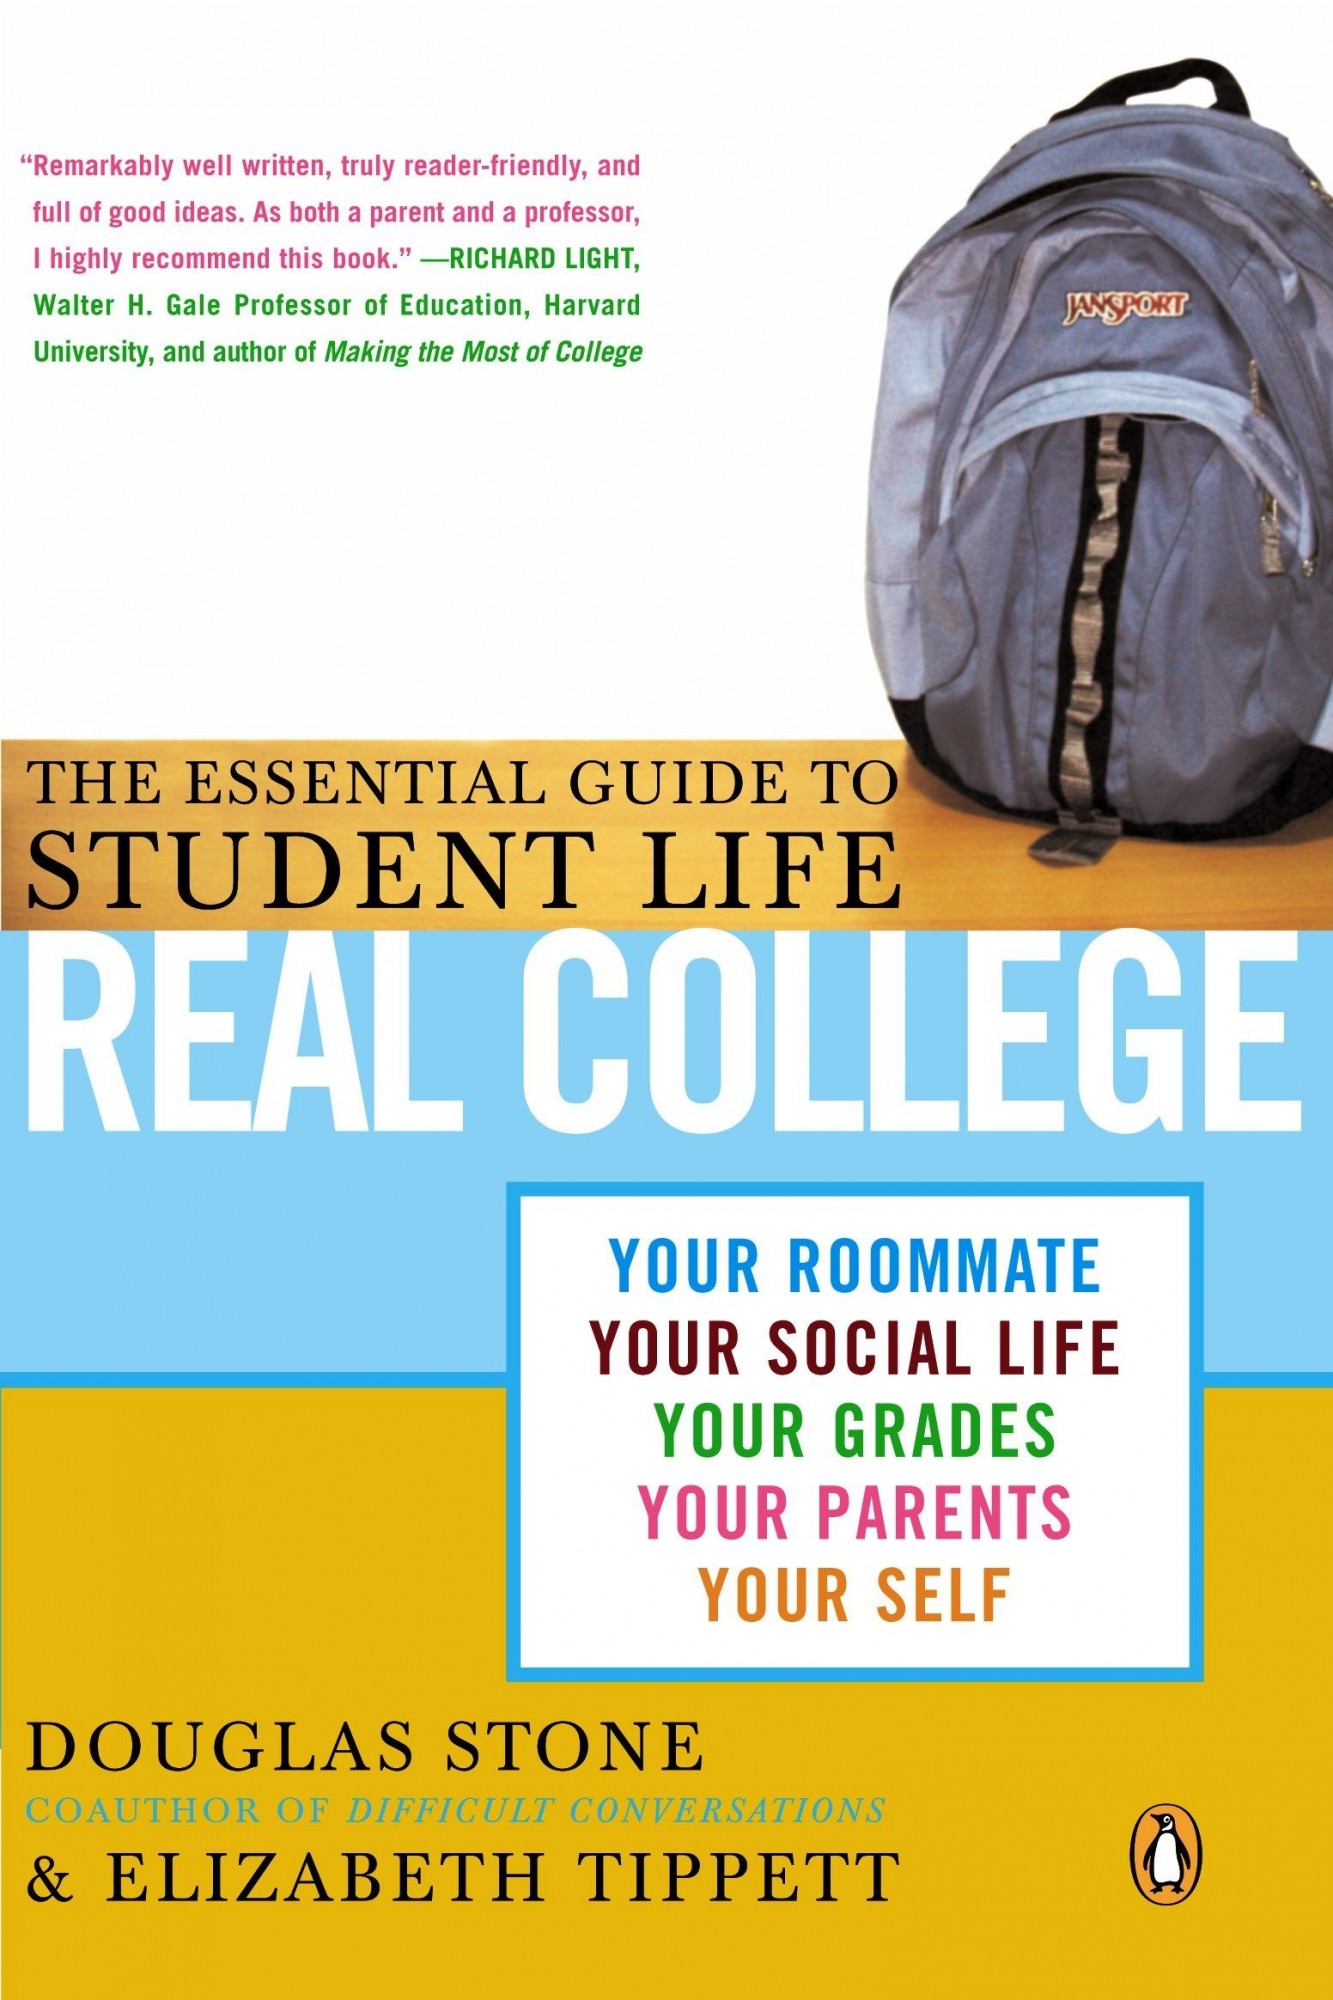 Real College - The Essential Guide To Student Life (2004)